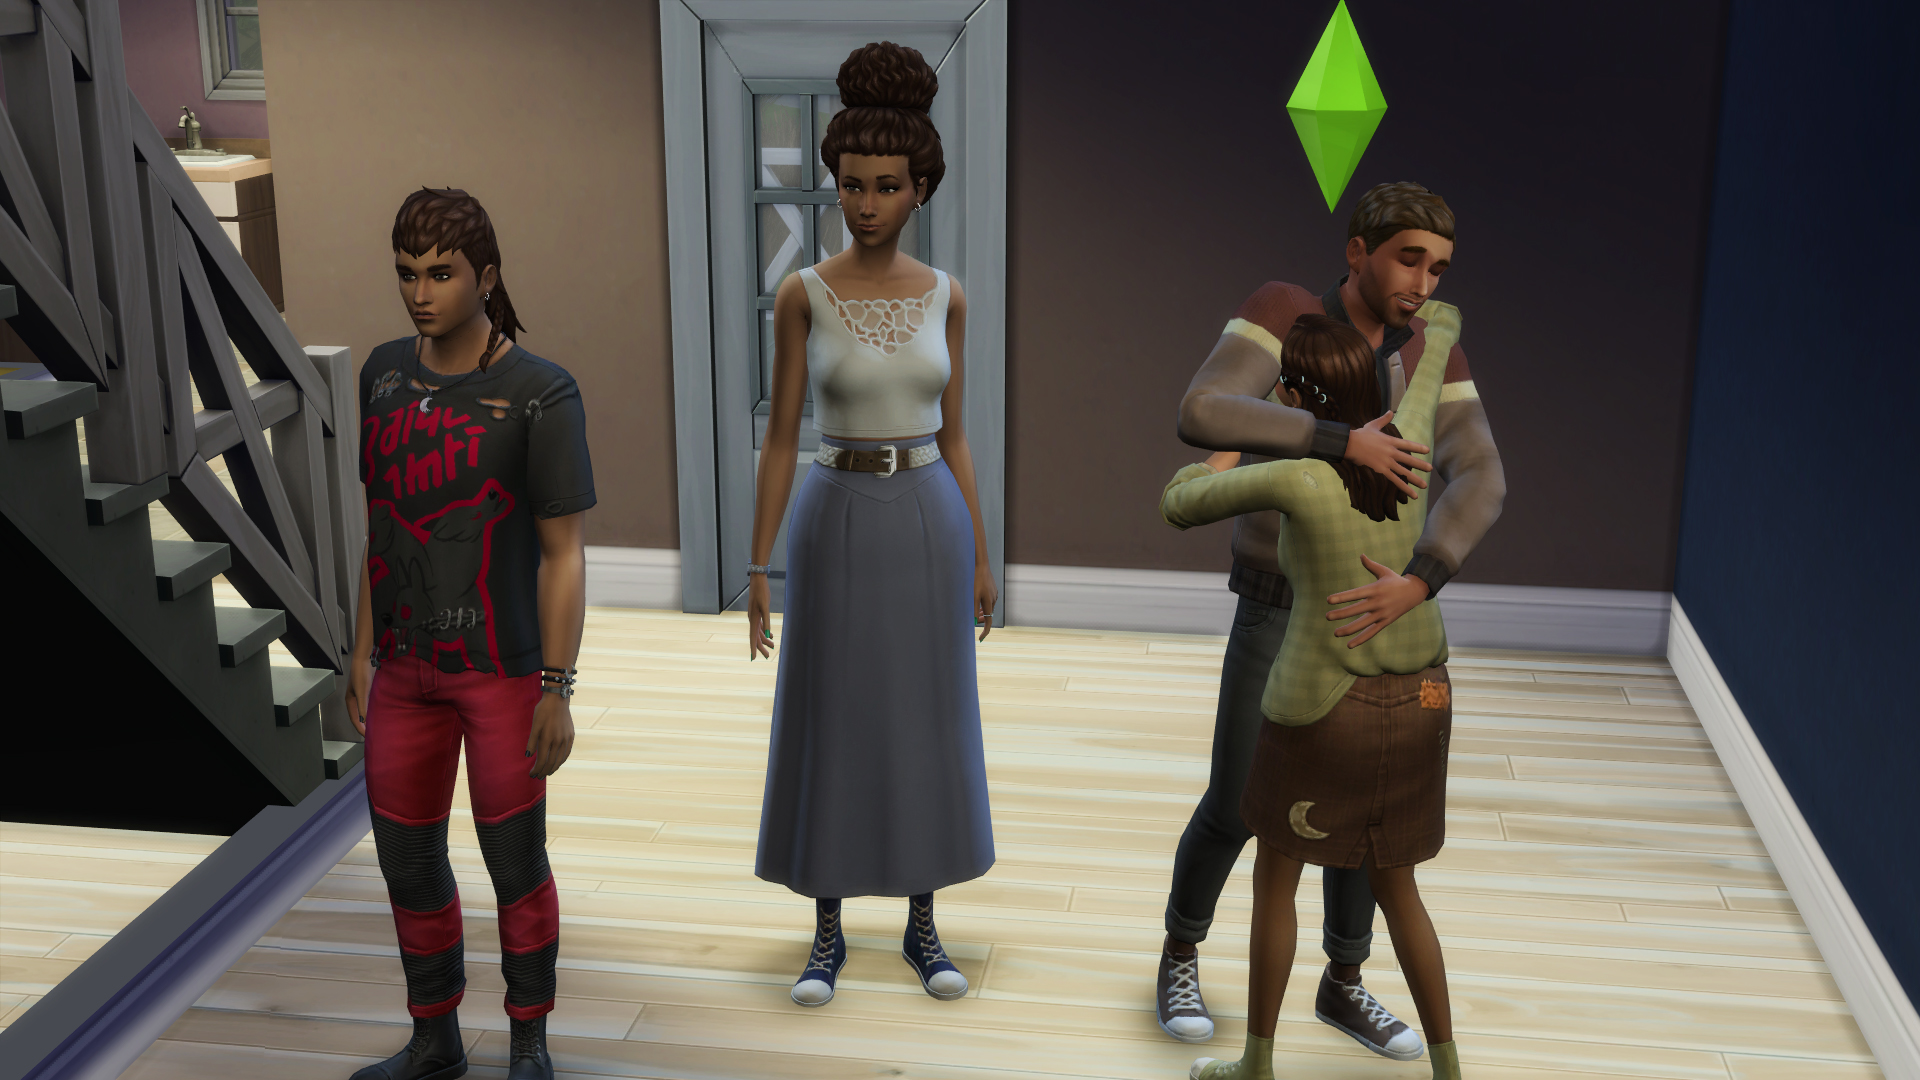 sims 4 height slider mod download